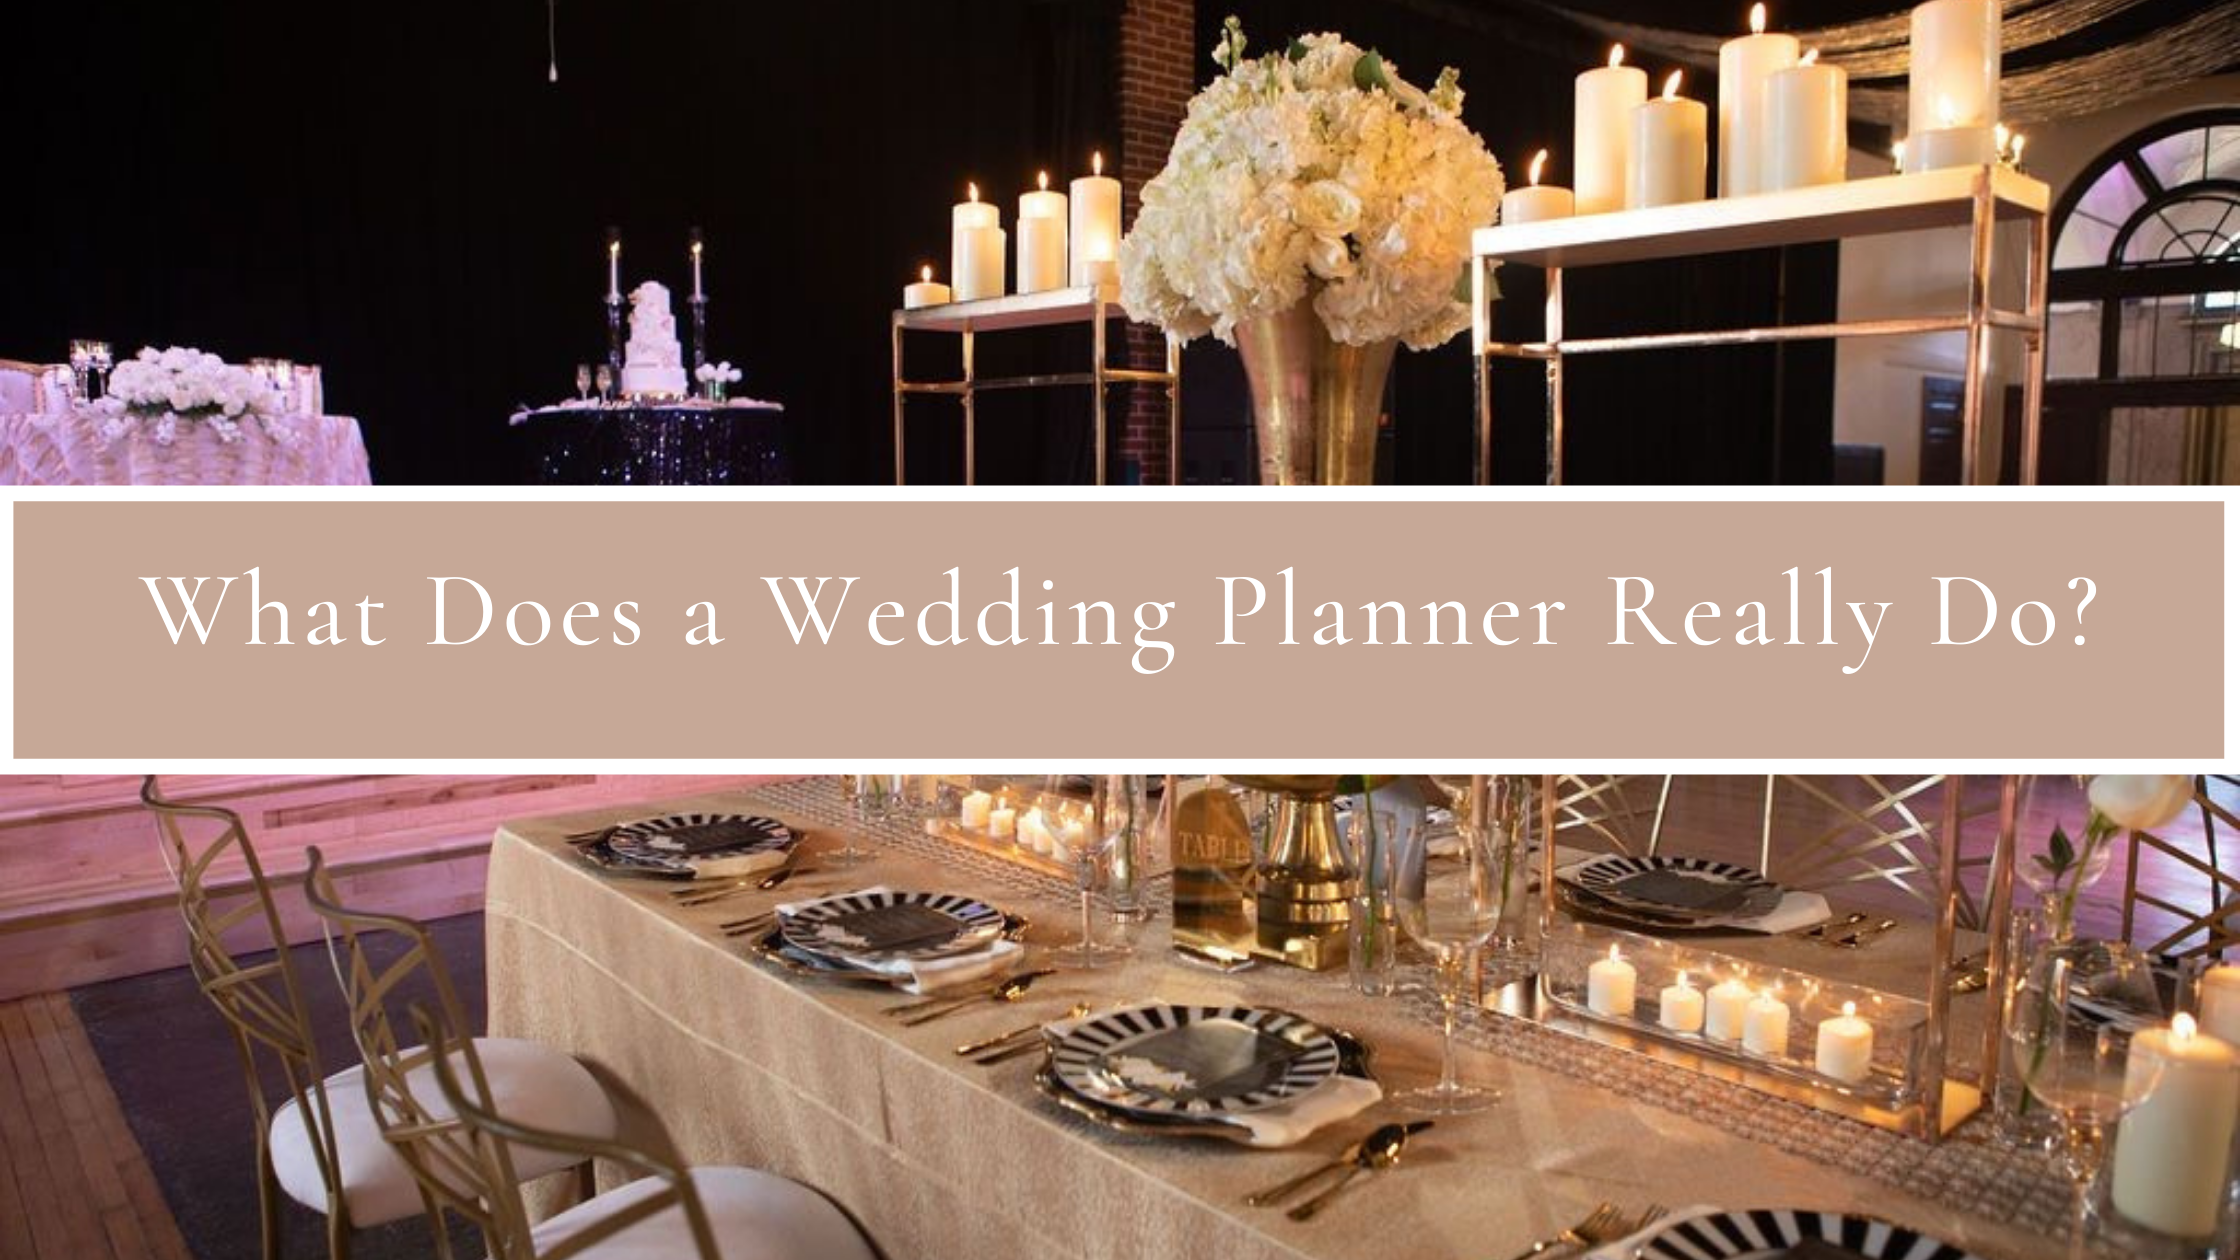 What Does a Wedding Planner Really Do?